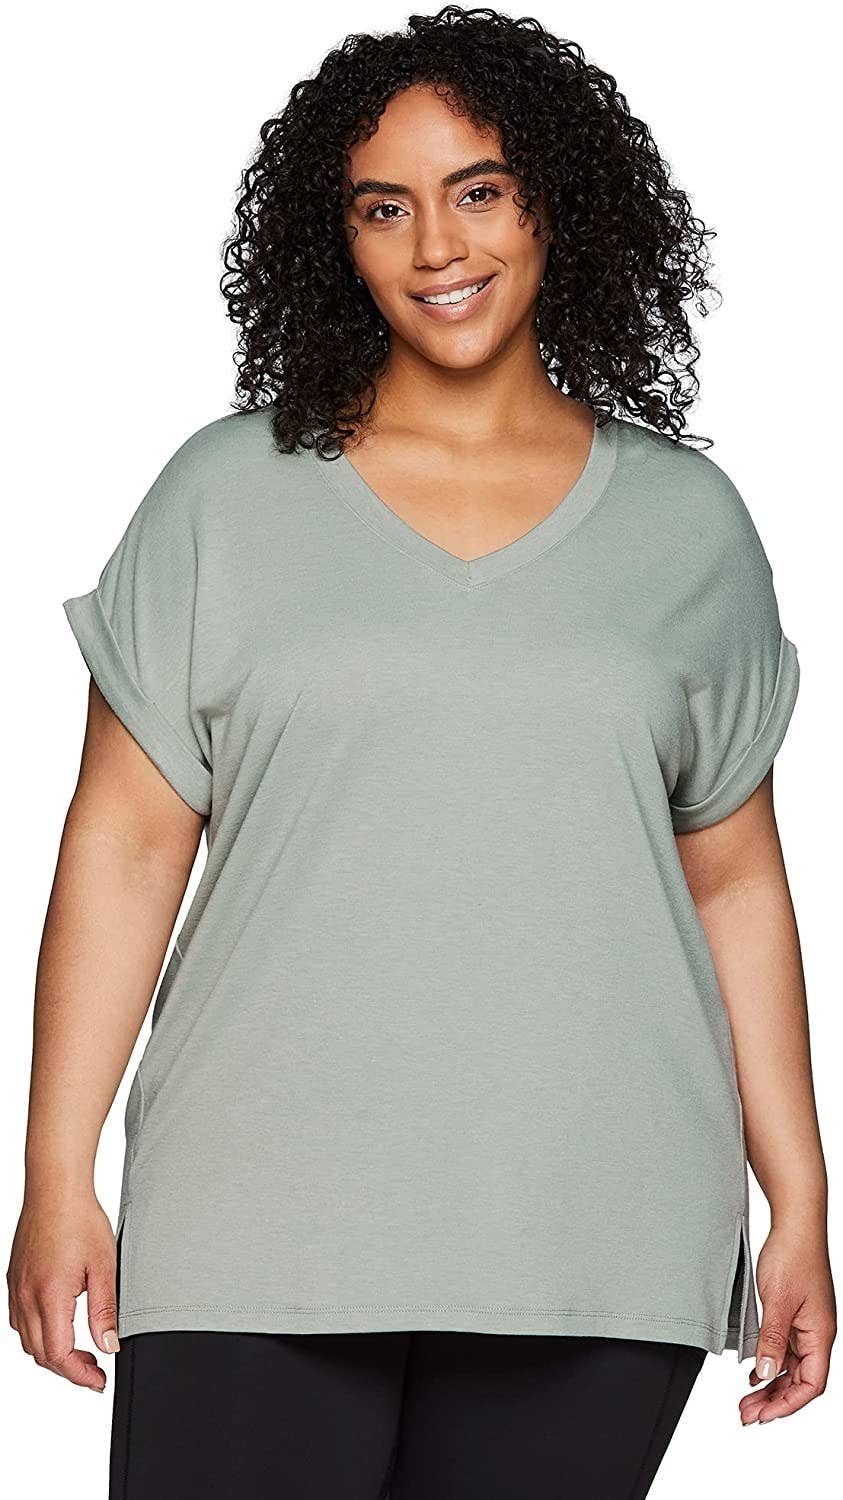 10 Cute Plus Size Workout Clothes - My Curves And Curls  Sporty outfits, Plus  size sportswear, Plus size womens clothing